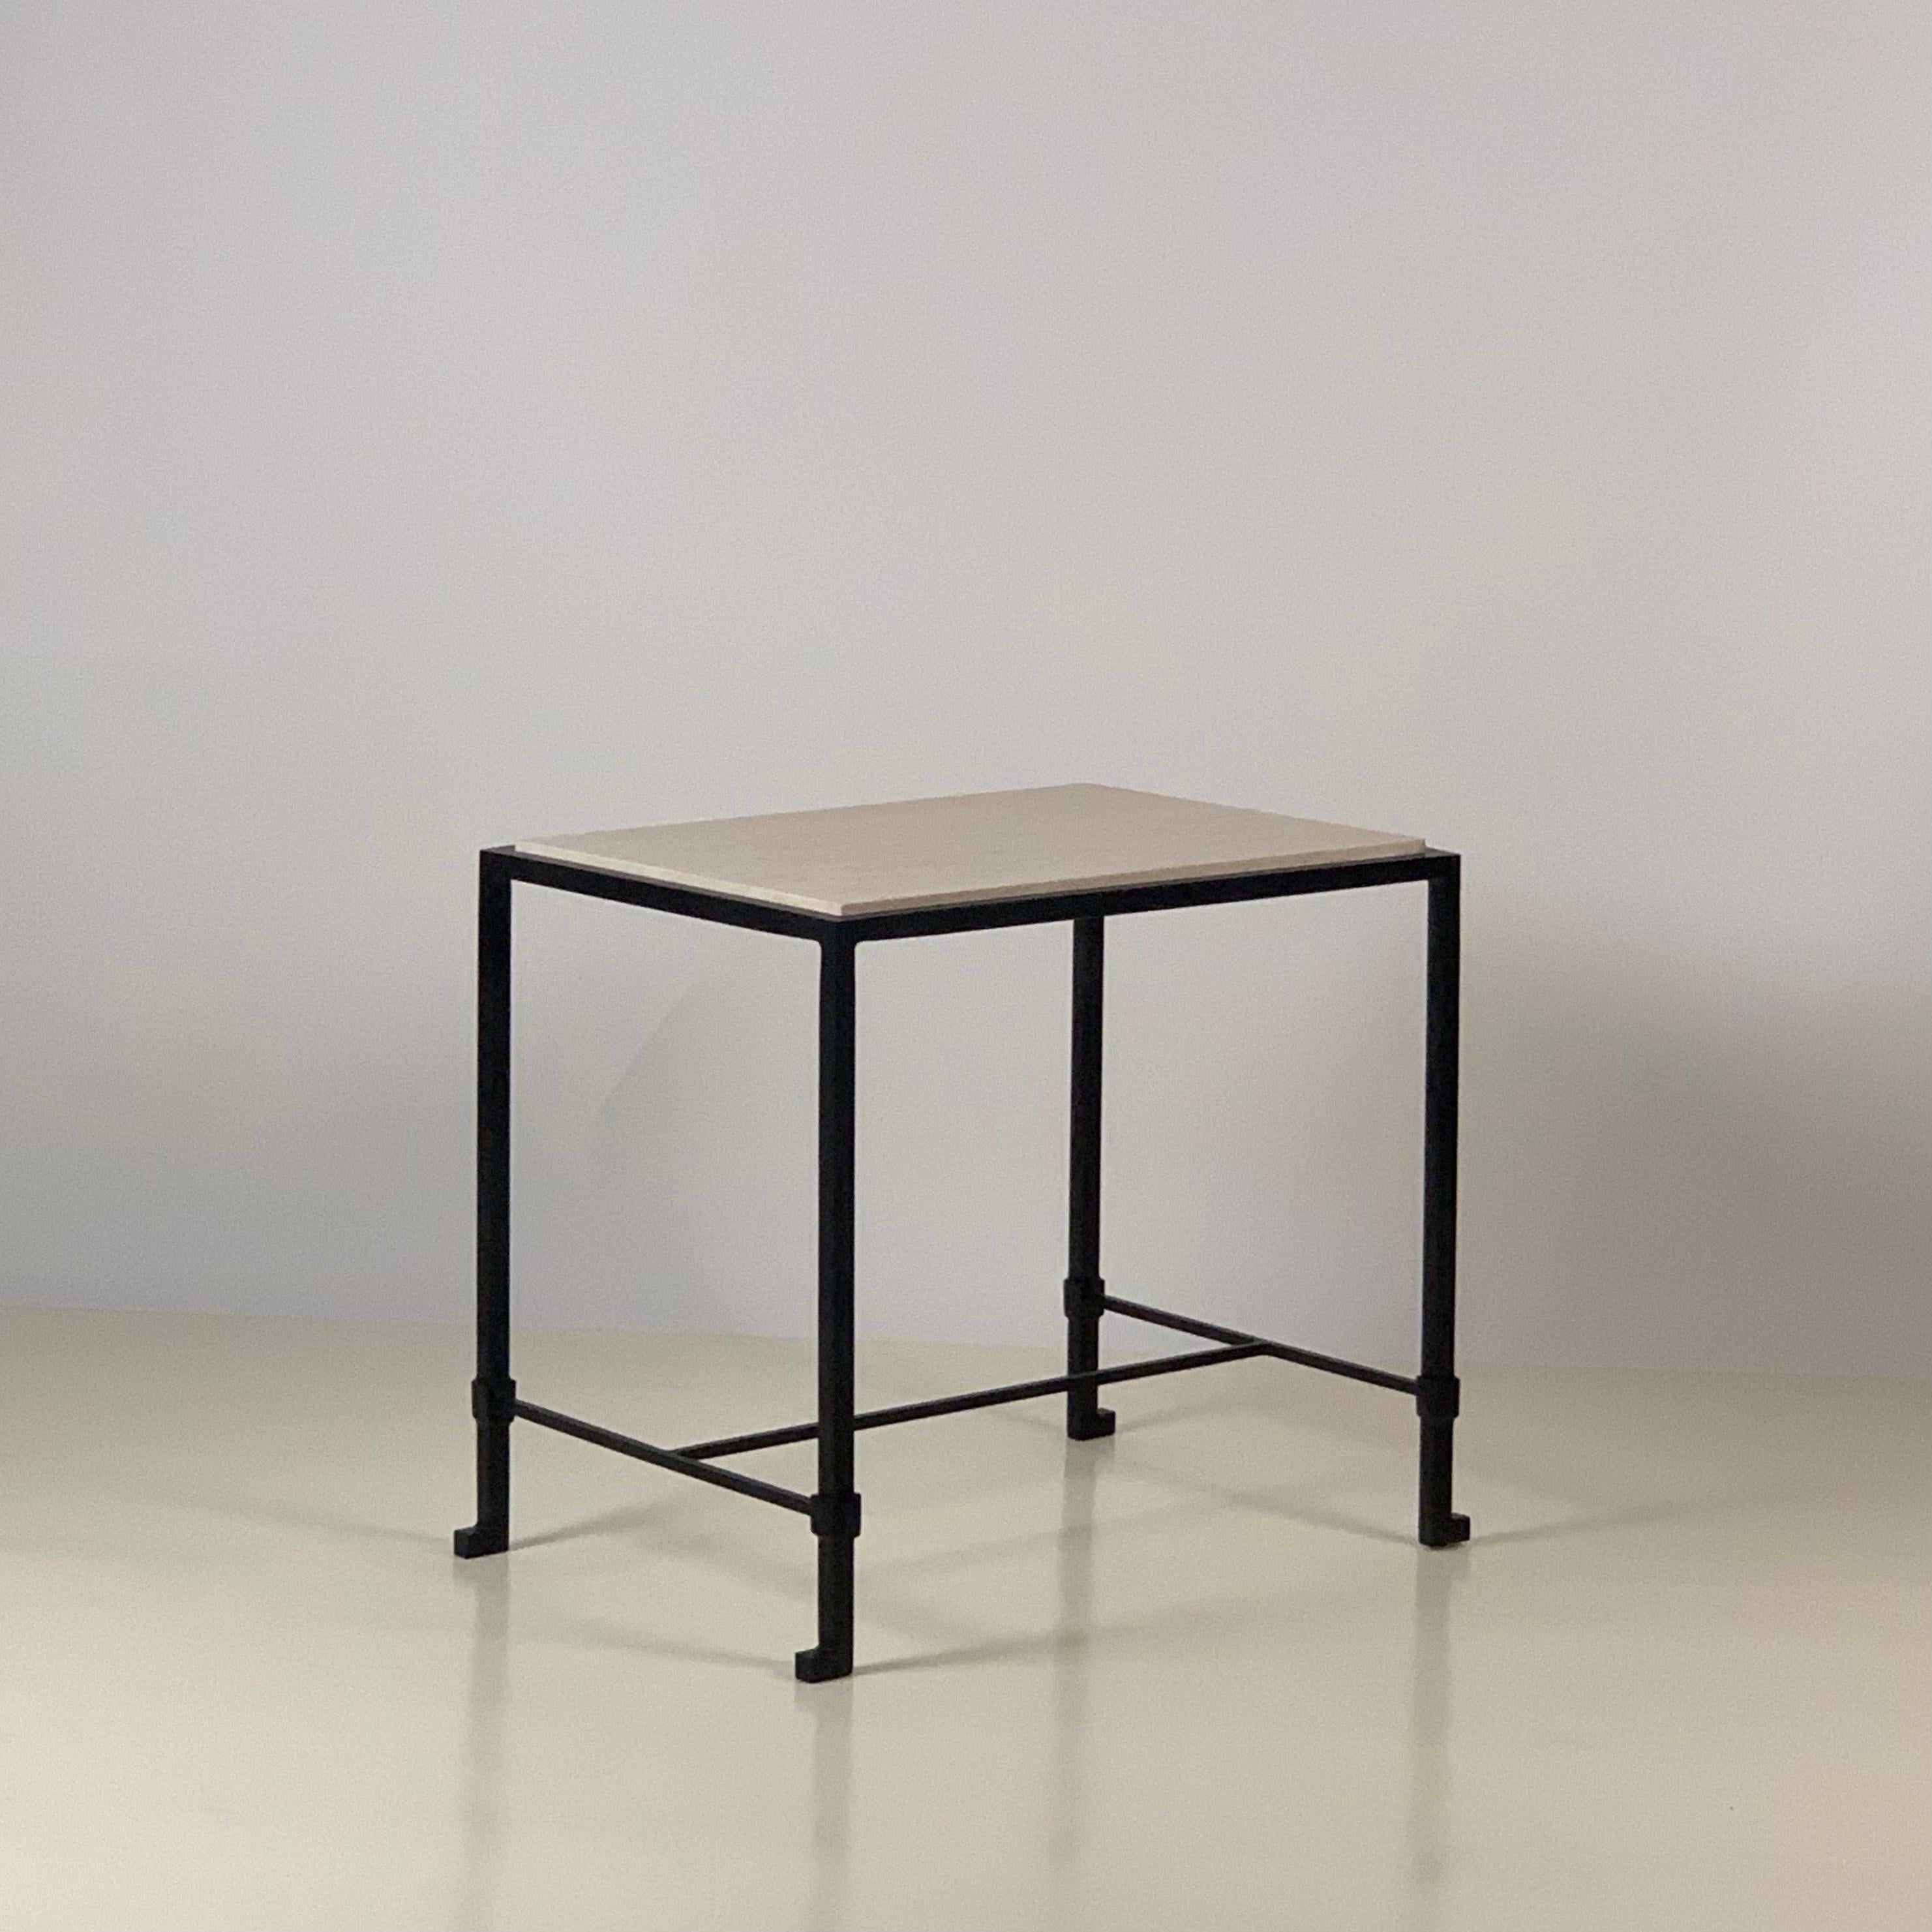 Art Deco 'Diagramme' Blackened Iron and Travertine Side or End Table by Design Frères For Sale